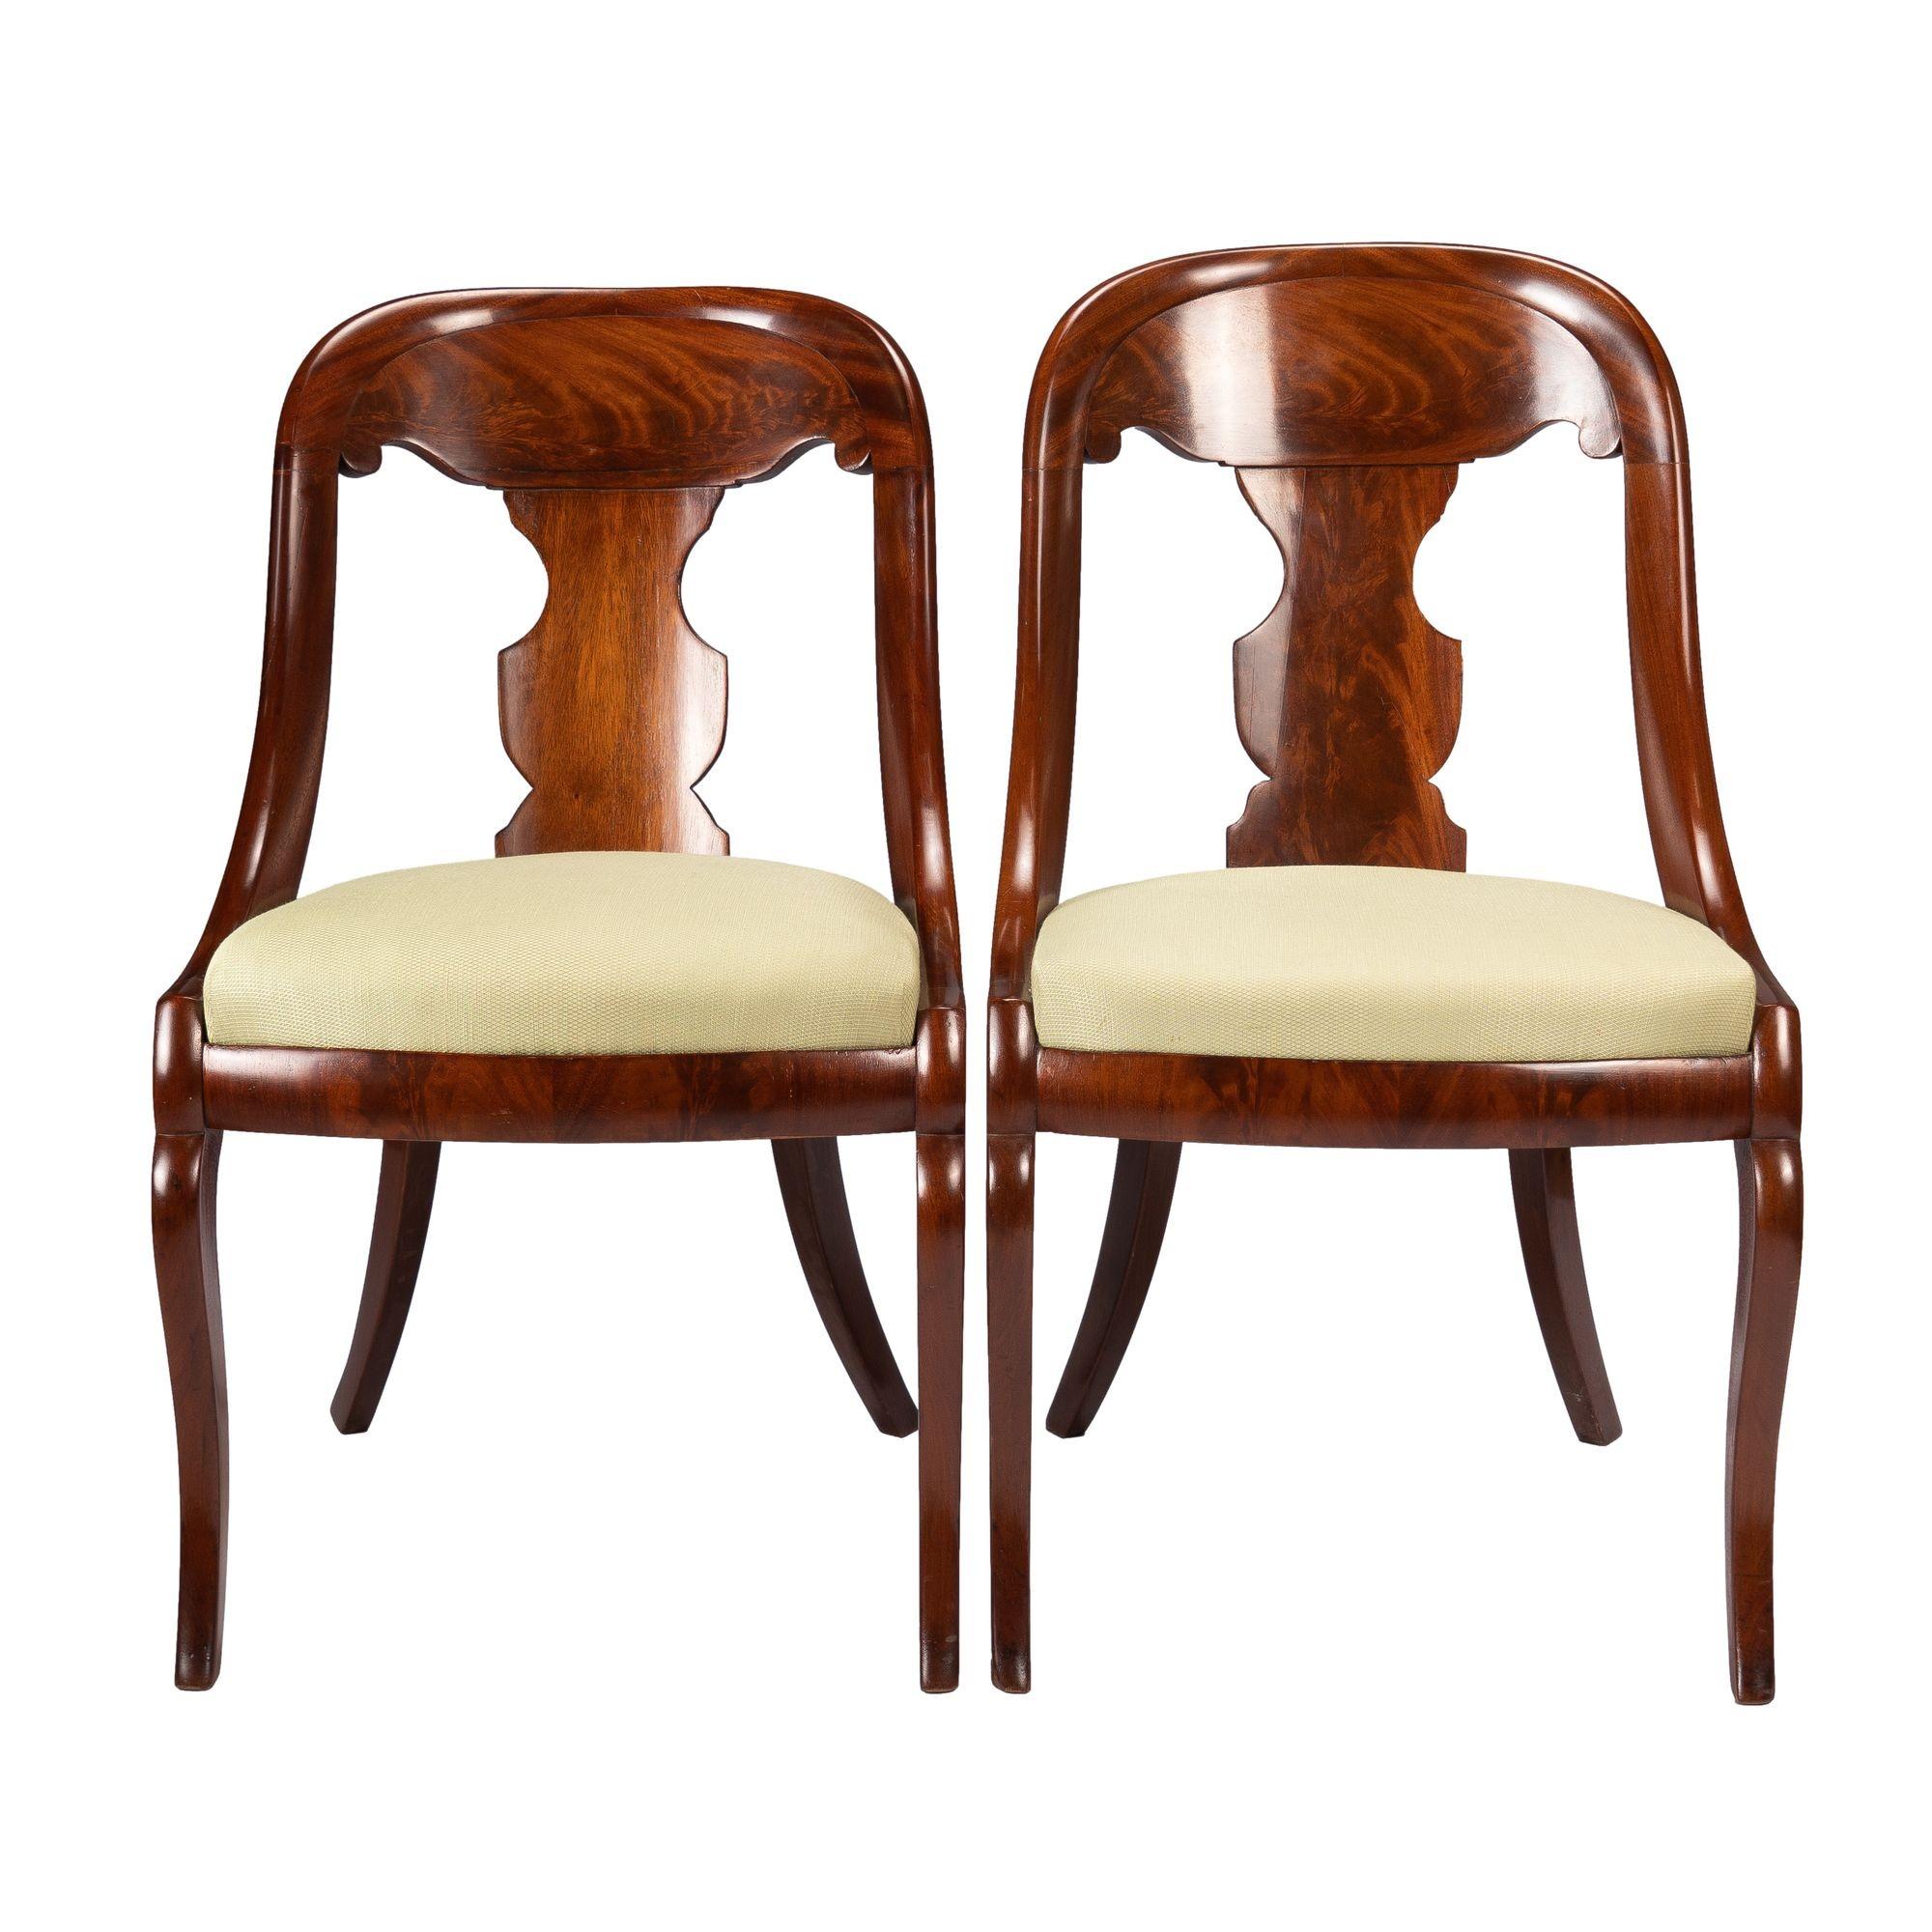 Pair of American Mahogany Gondola Chairs, 1815-35 In Good Condition For Sale In Kenilworth, IL